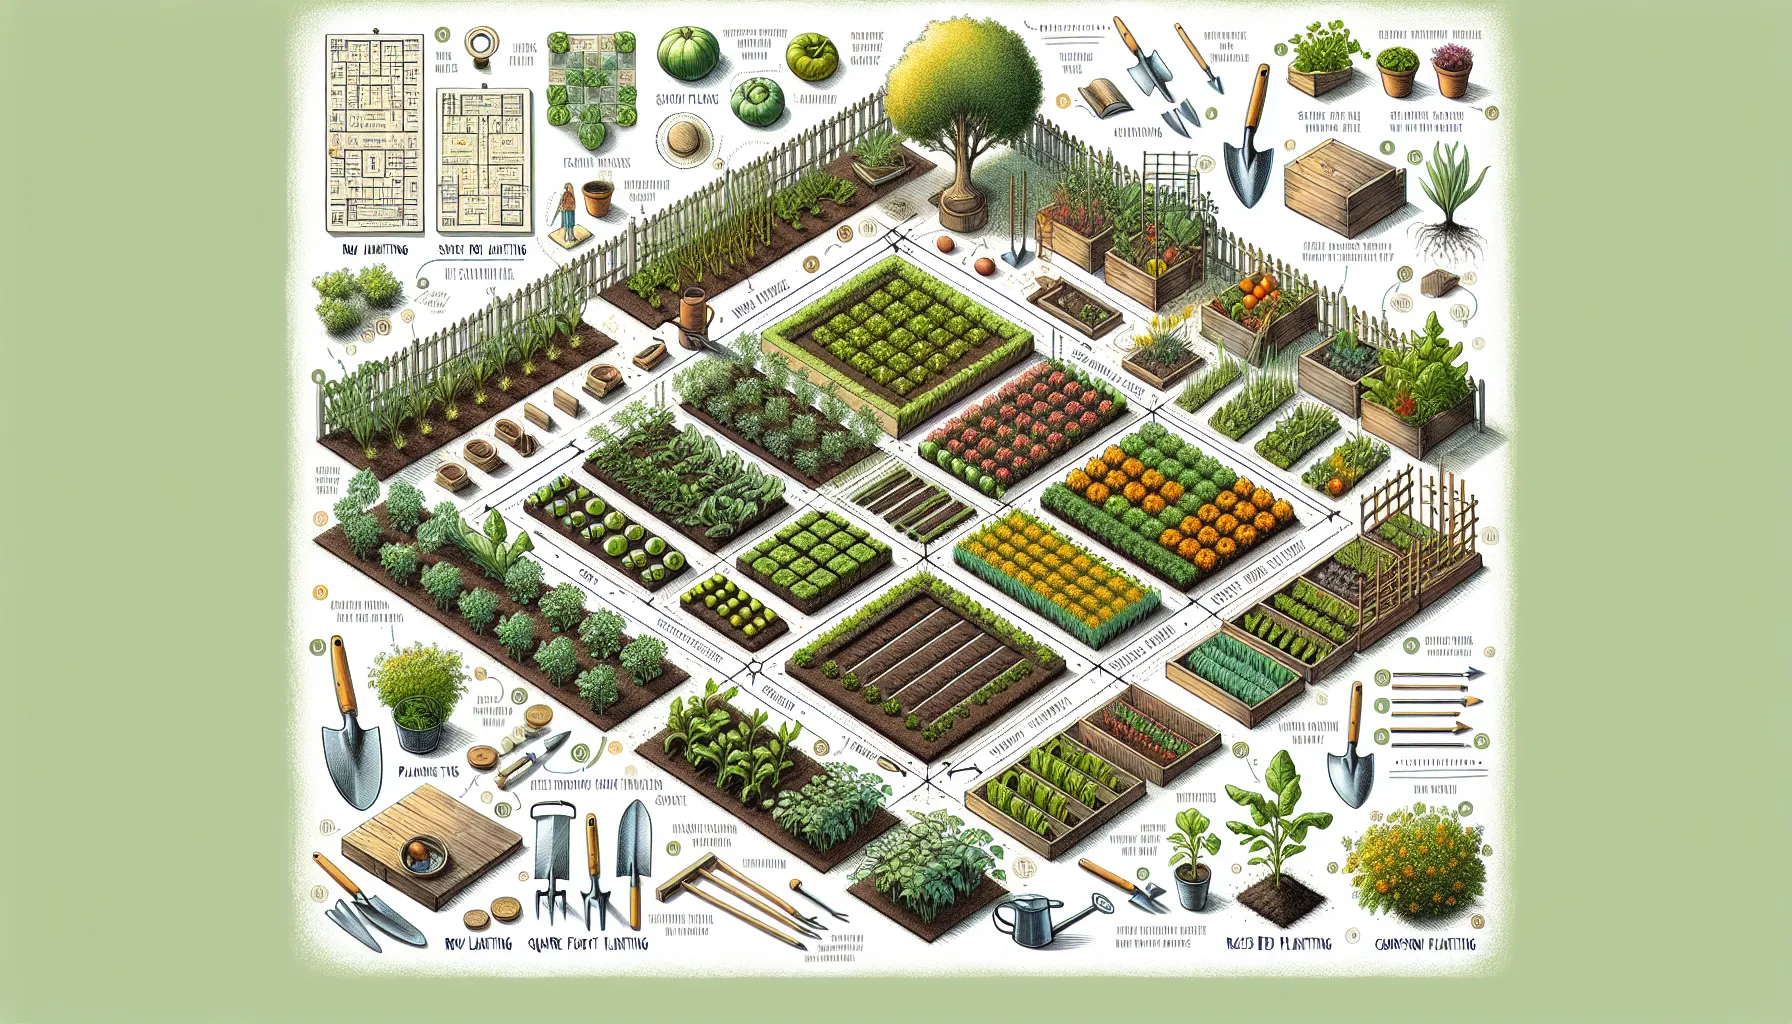 An illustrated best vegetable garden layout showing various plants in neatly arranged beds with gardening tools and techniques on the periphery.